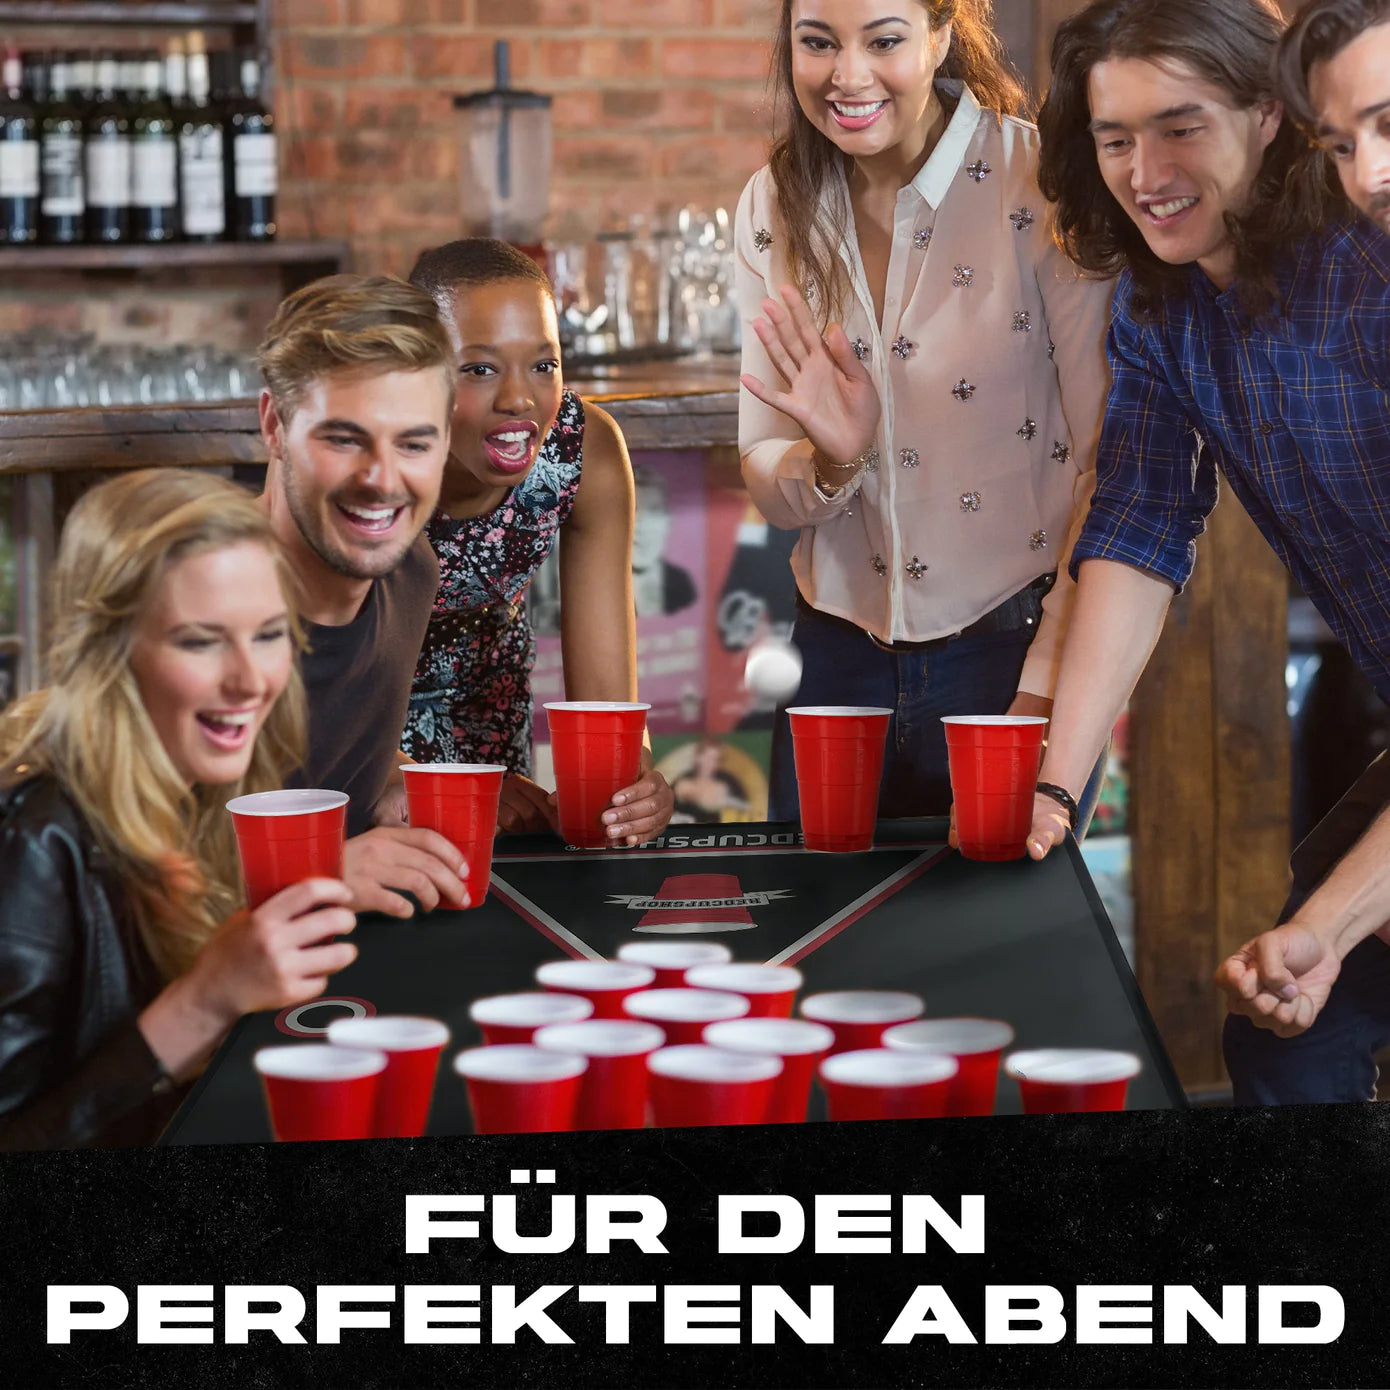 Table de Bière Pong - Table Beer Pong God Pong + 60 Red Cups + 60